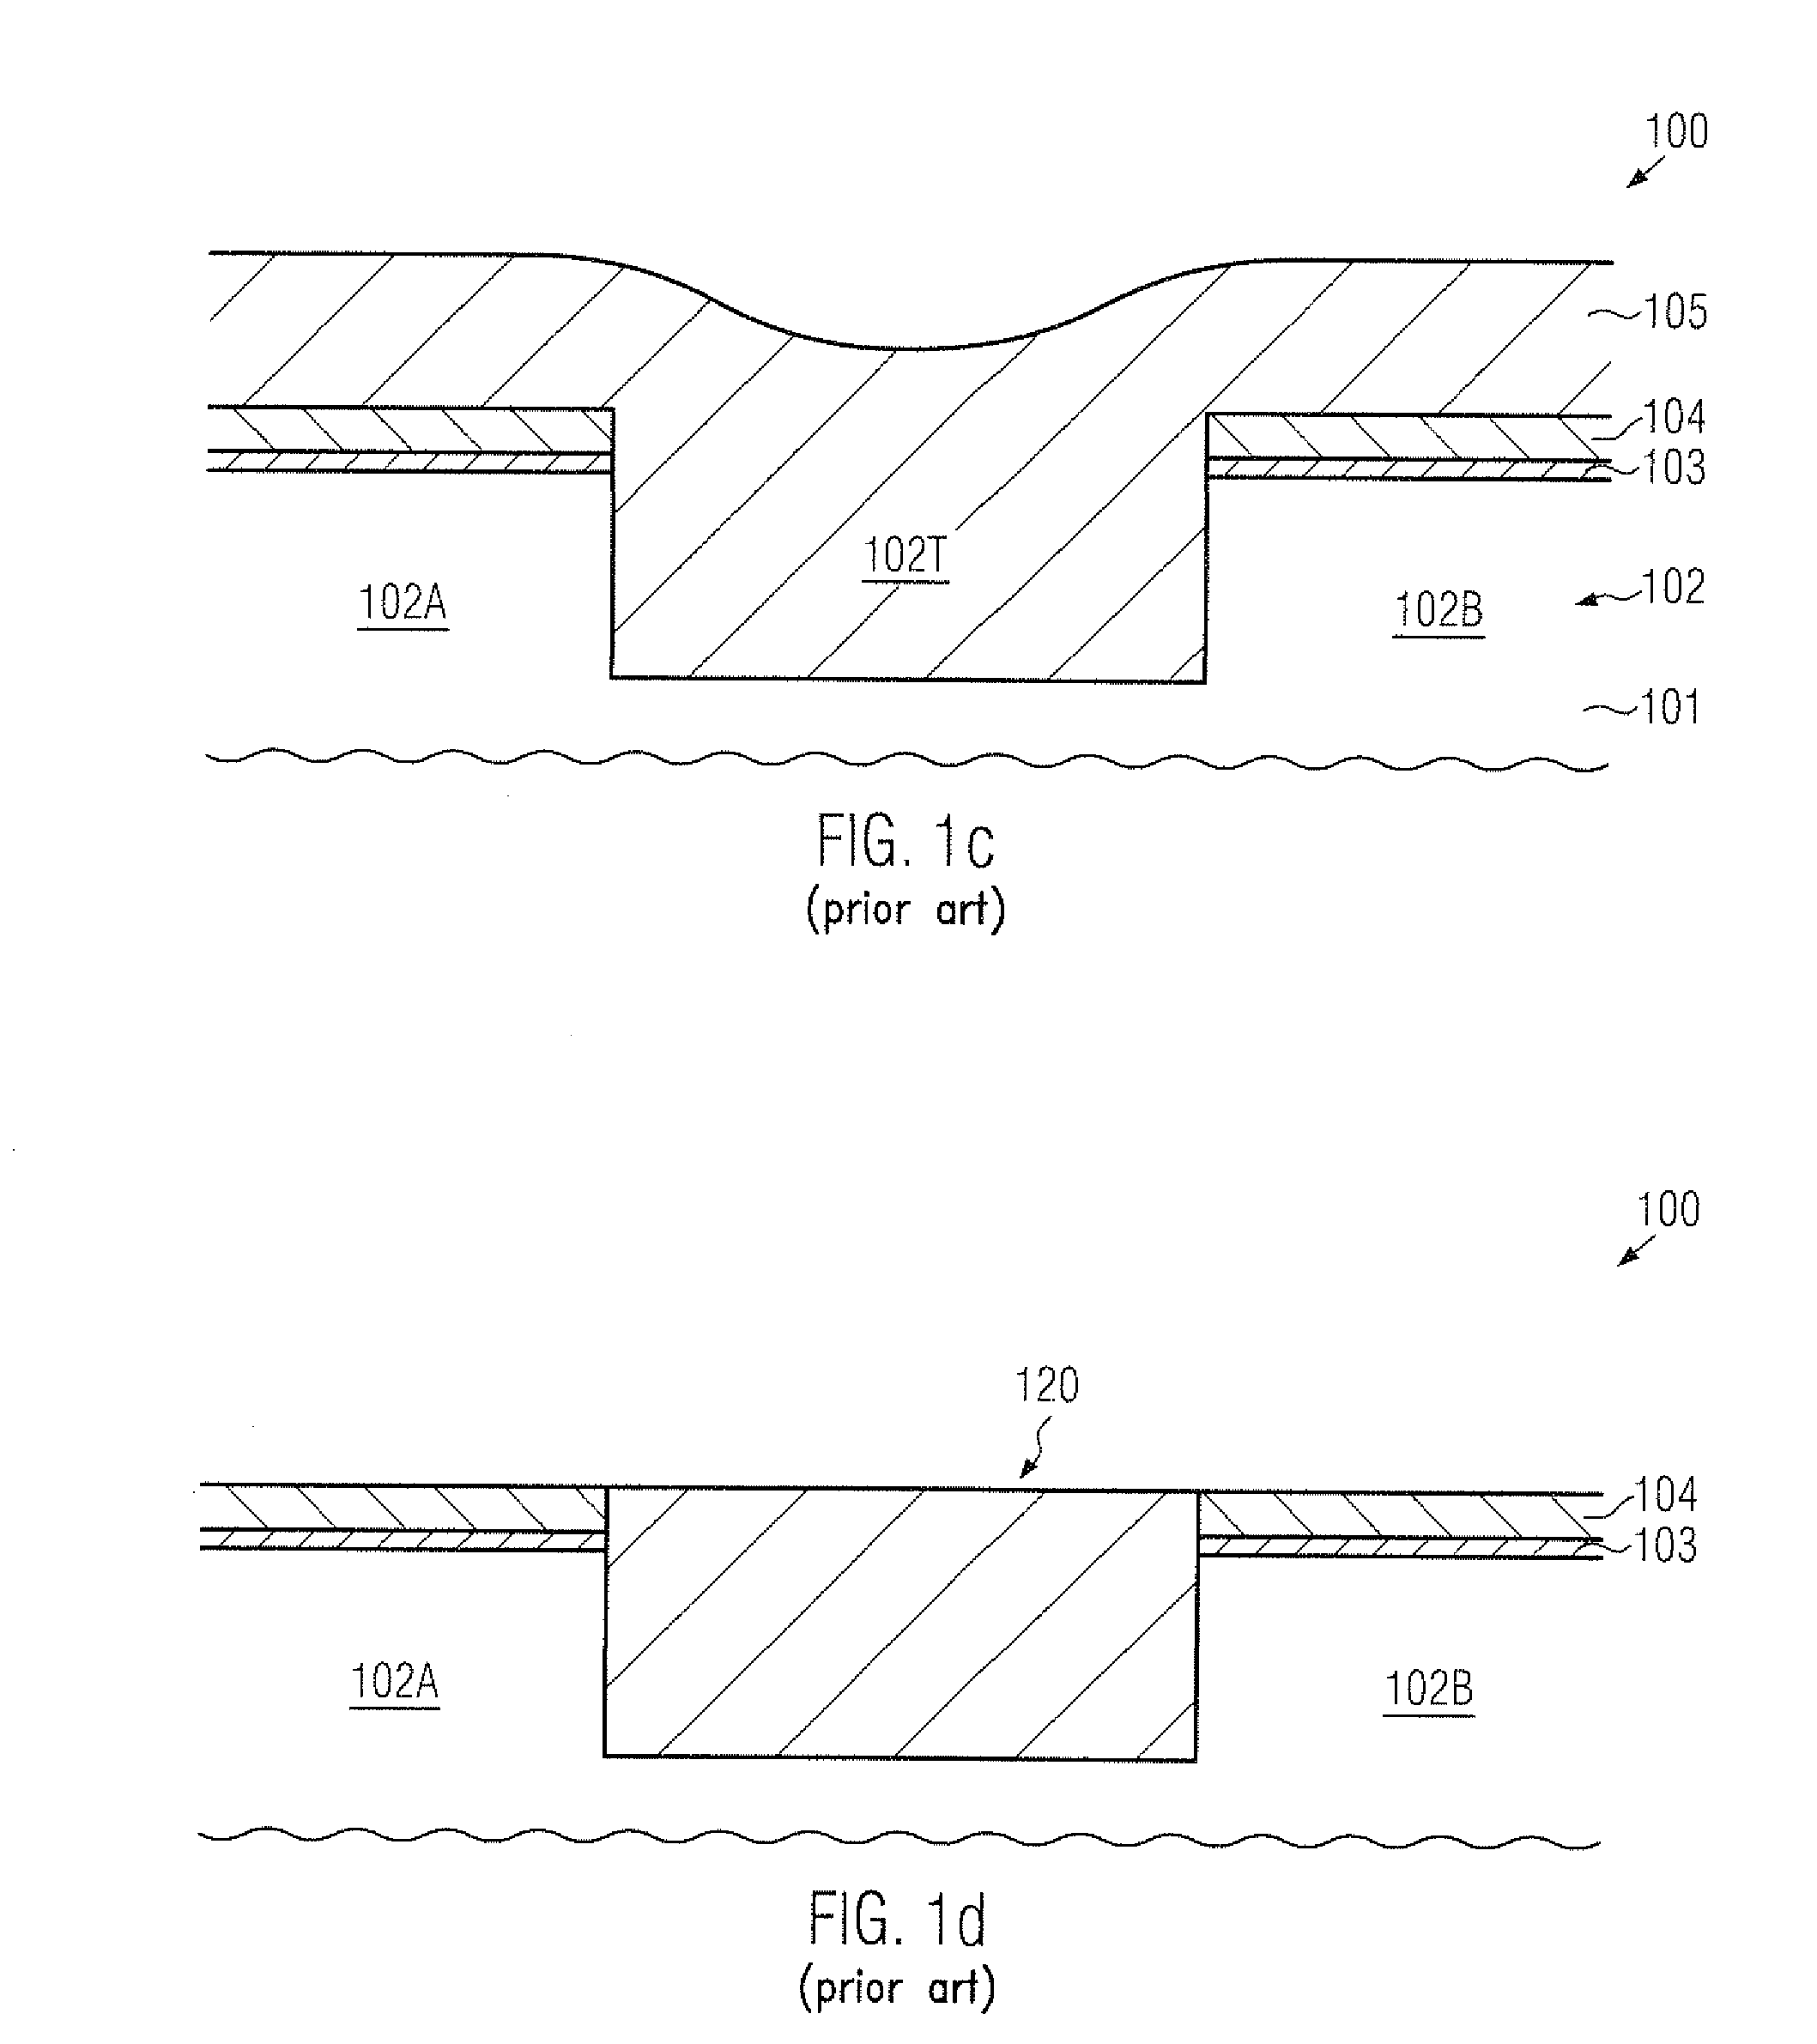 Buried etch stop layer in trench isolation structures for superior surface planarity in densely packed semiconductor devices